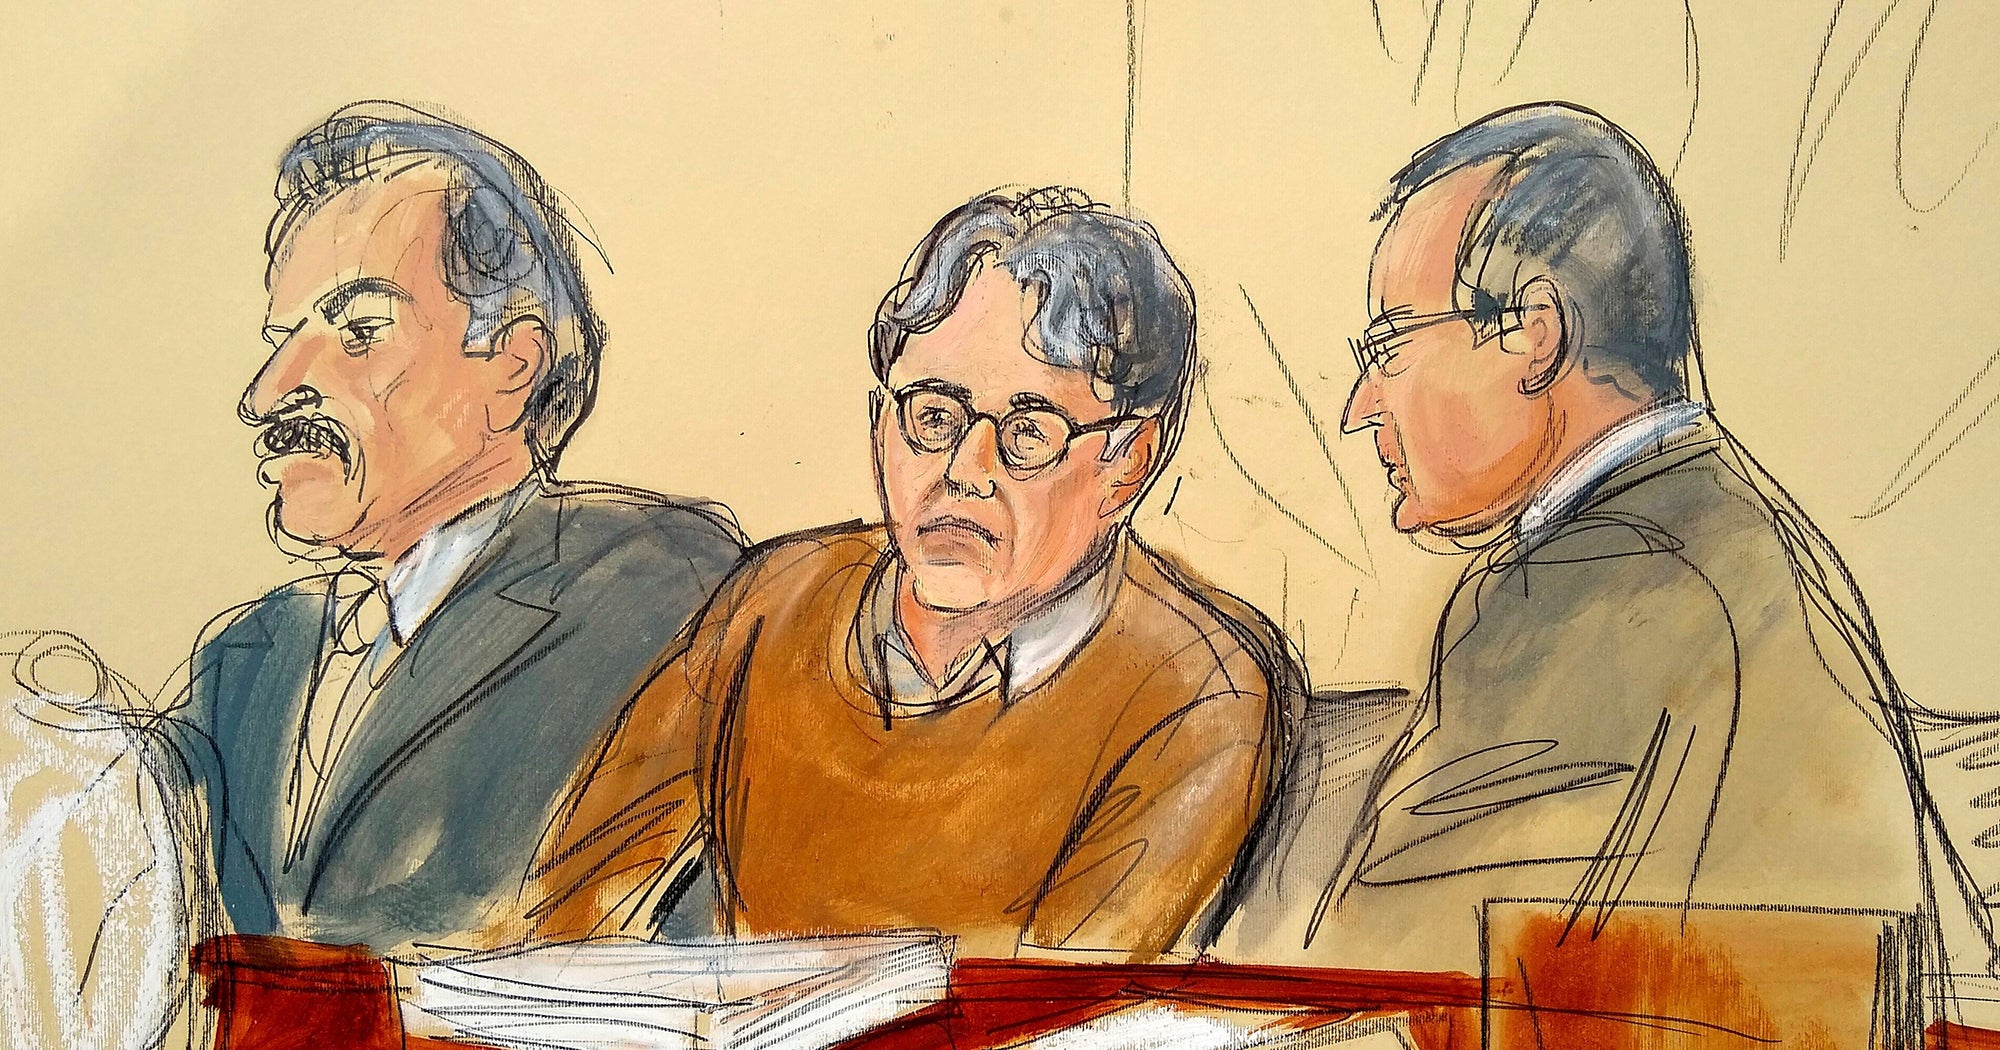 NXIVM Sex Cult Leader Keith Raniere Sentenced To 120 Years In Prison